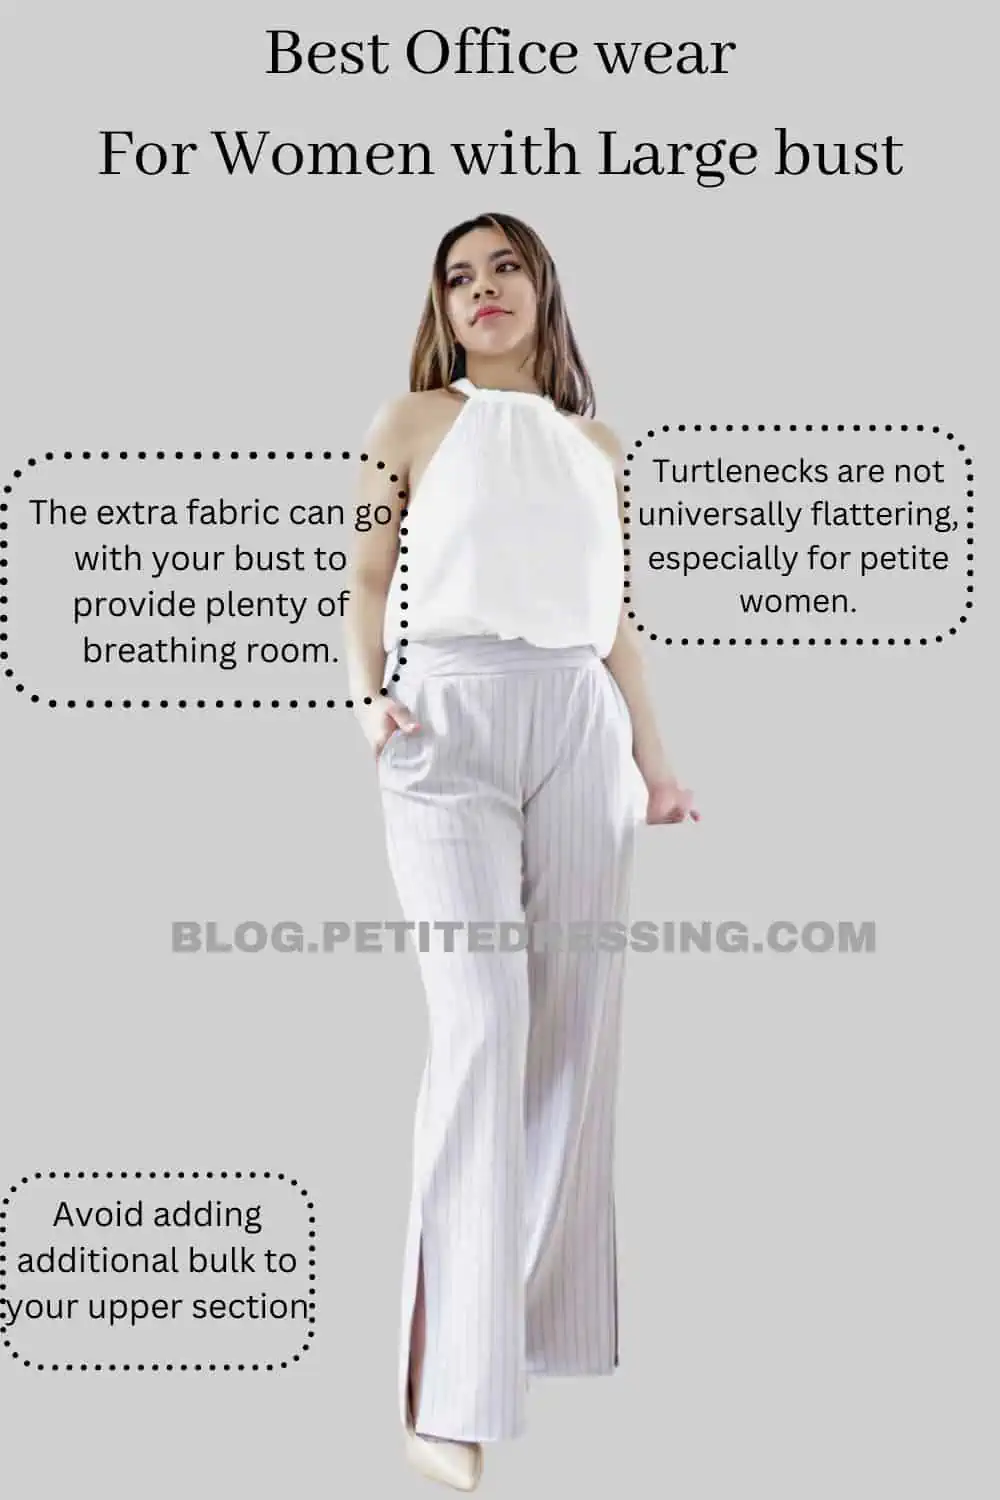 Office Wear Guide for Petite Women With A Large Bust - Petite Dressing